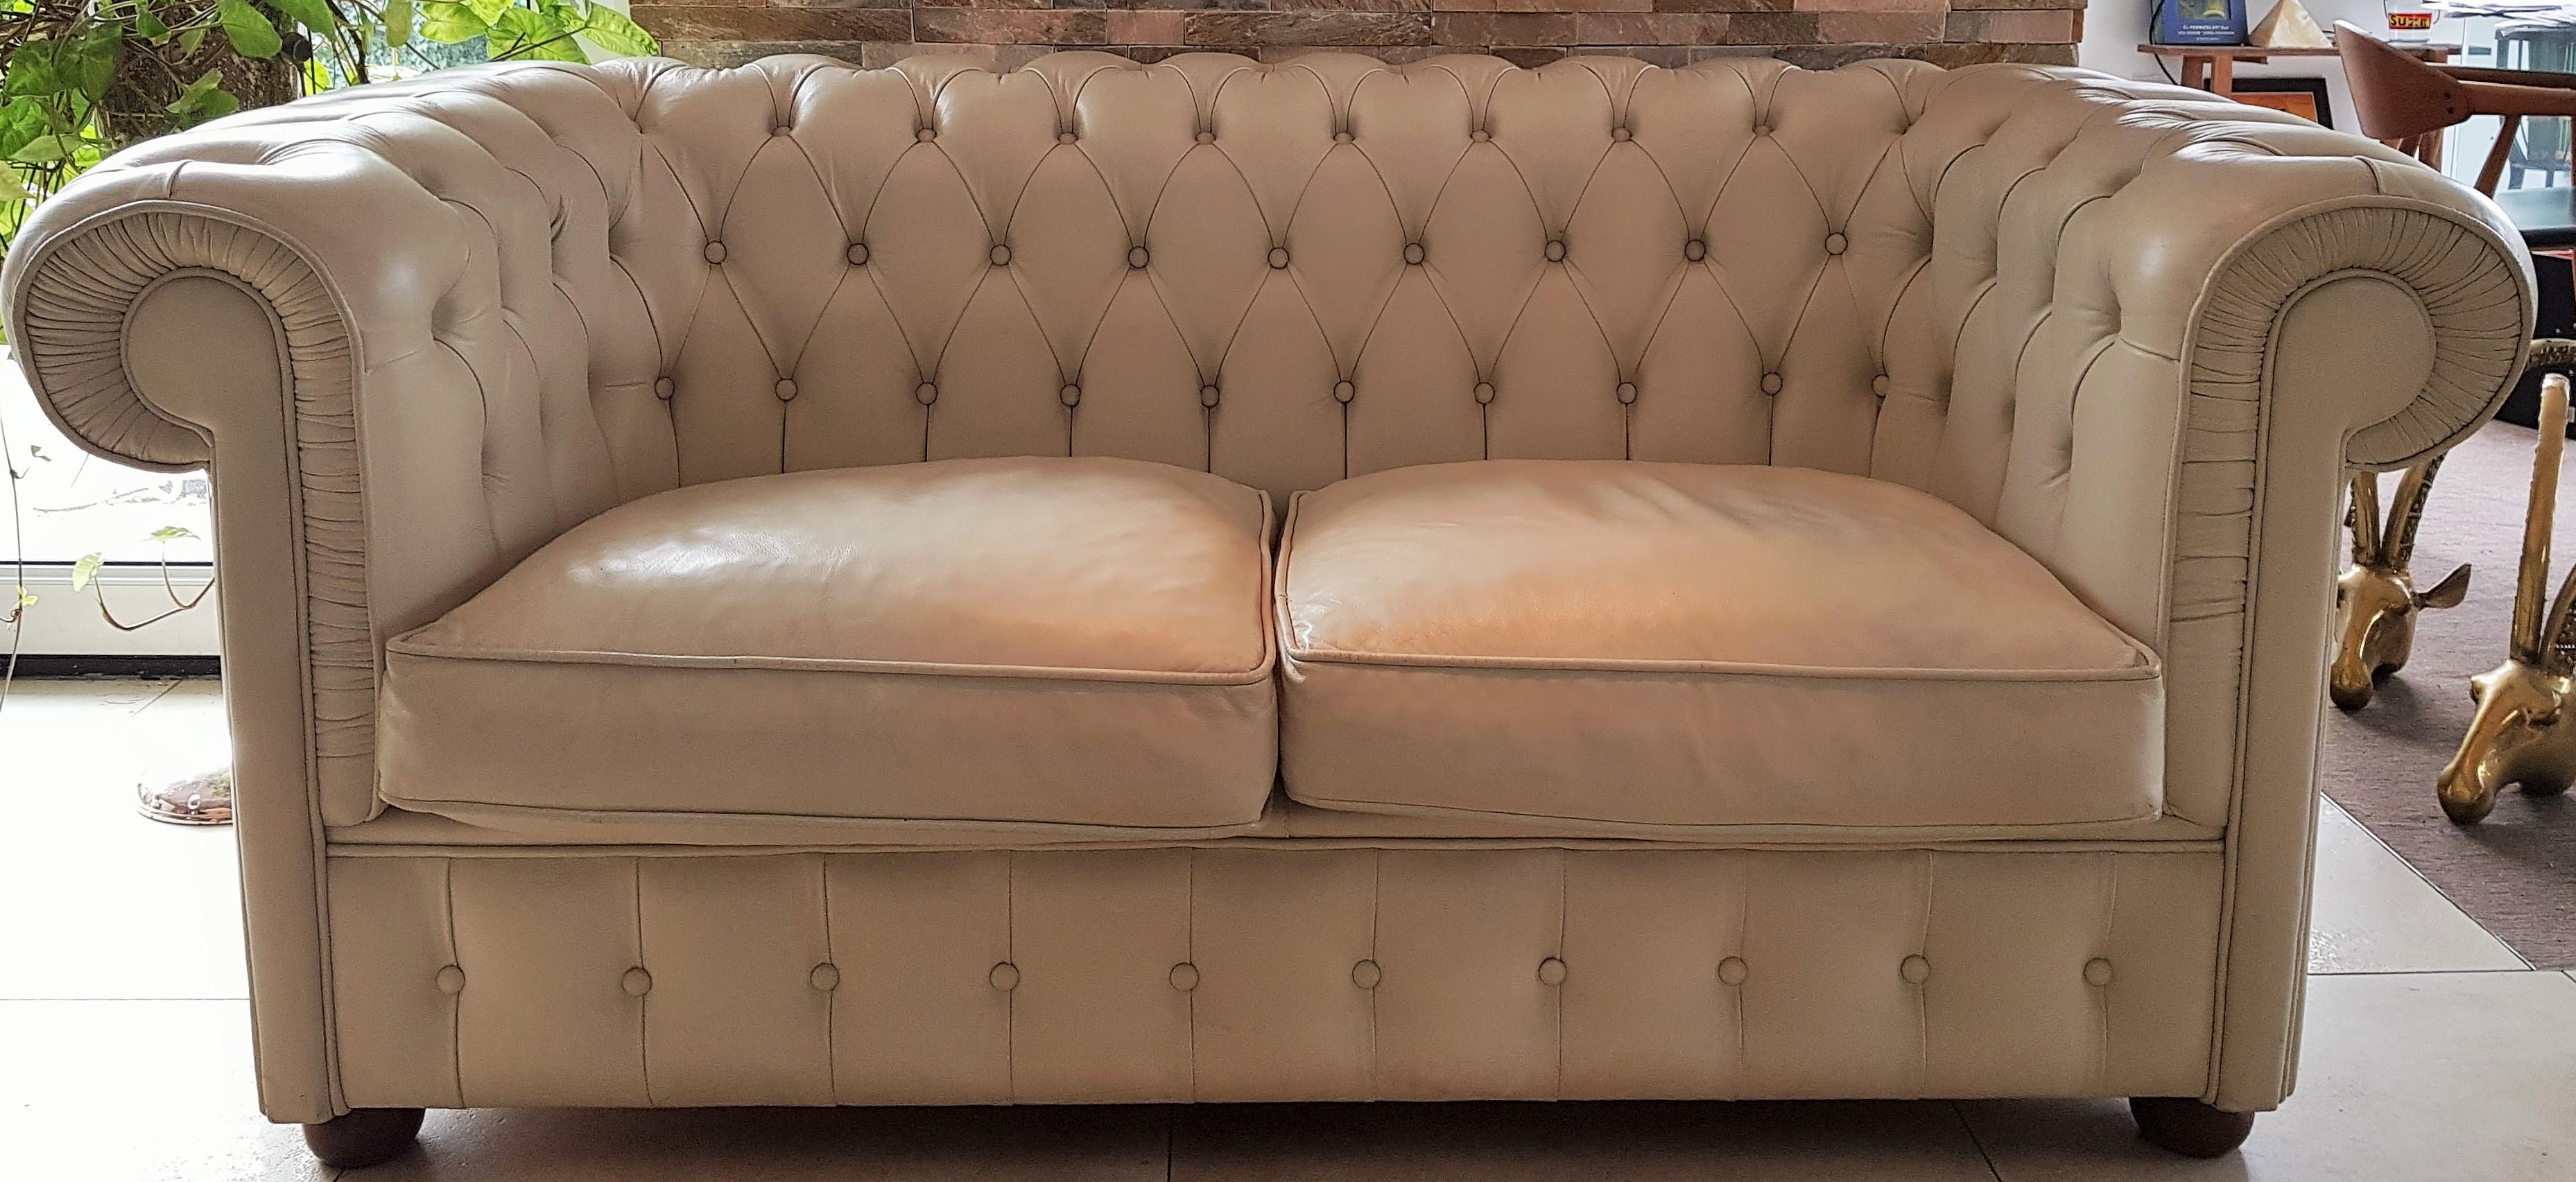 Canapé Loveseat Chesterfield en cuir blanc Whiting 13